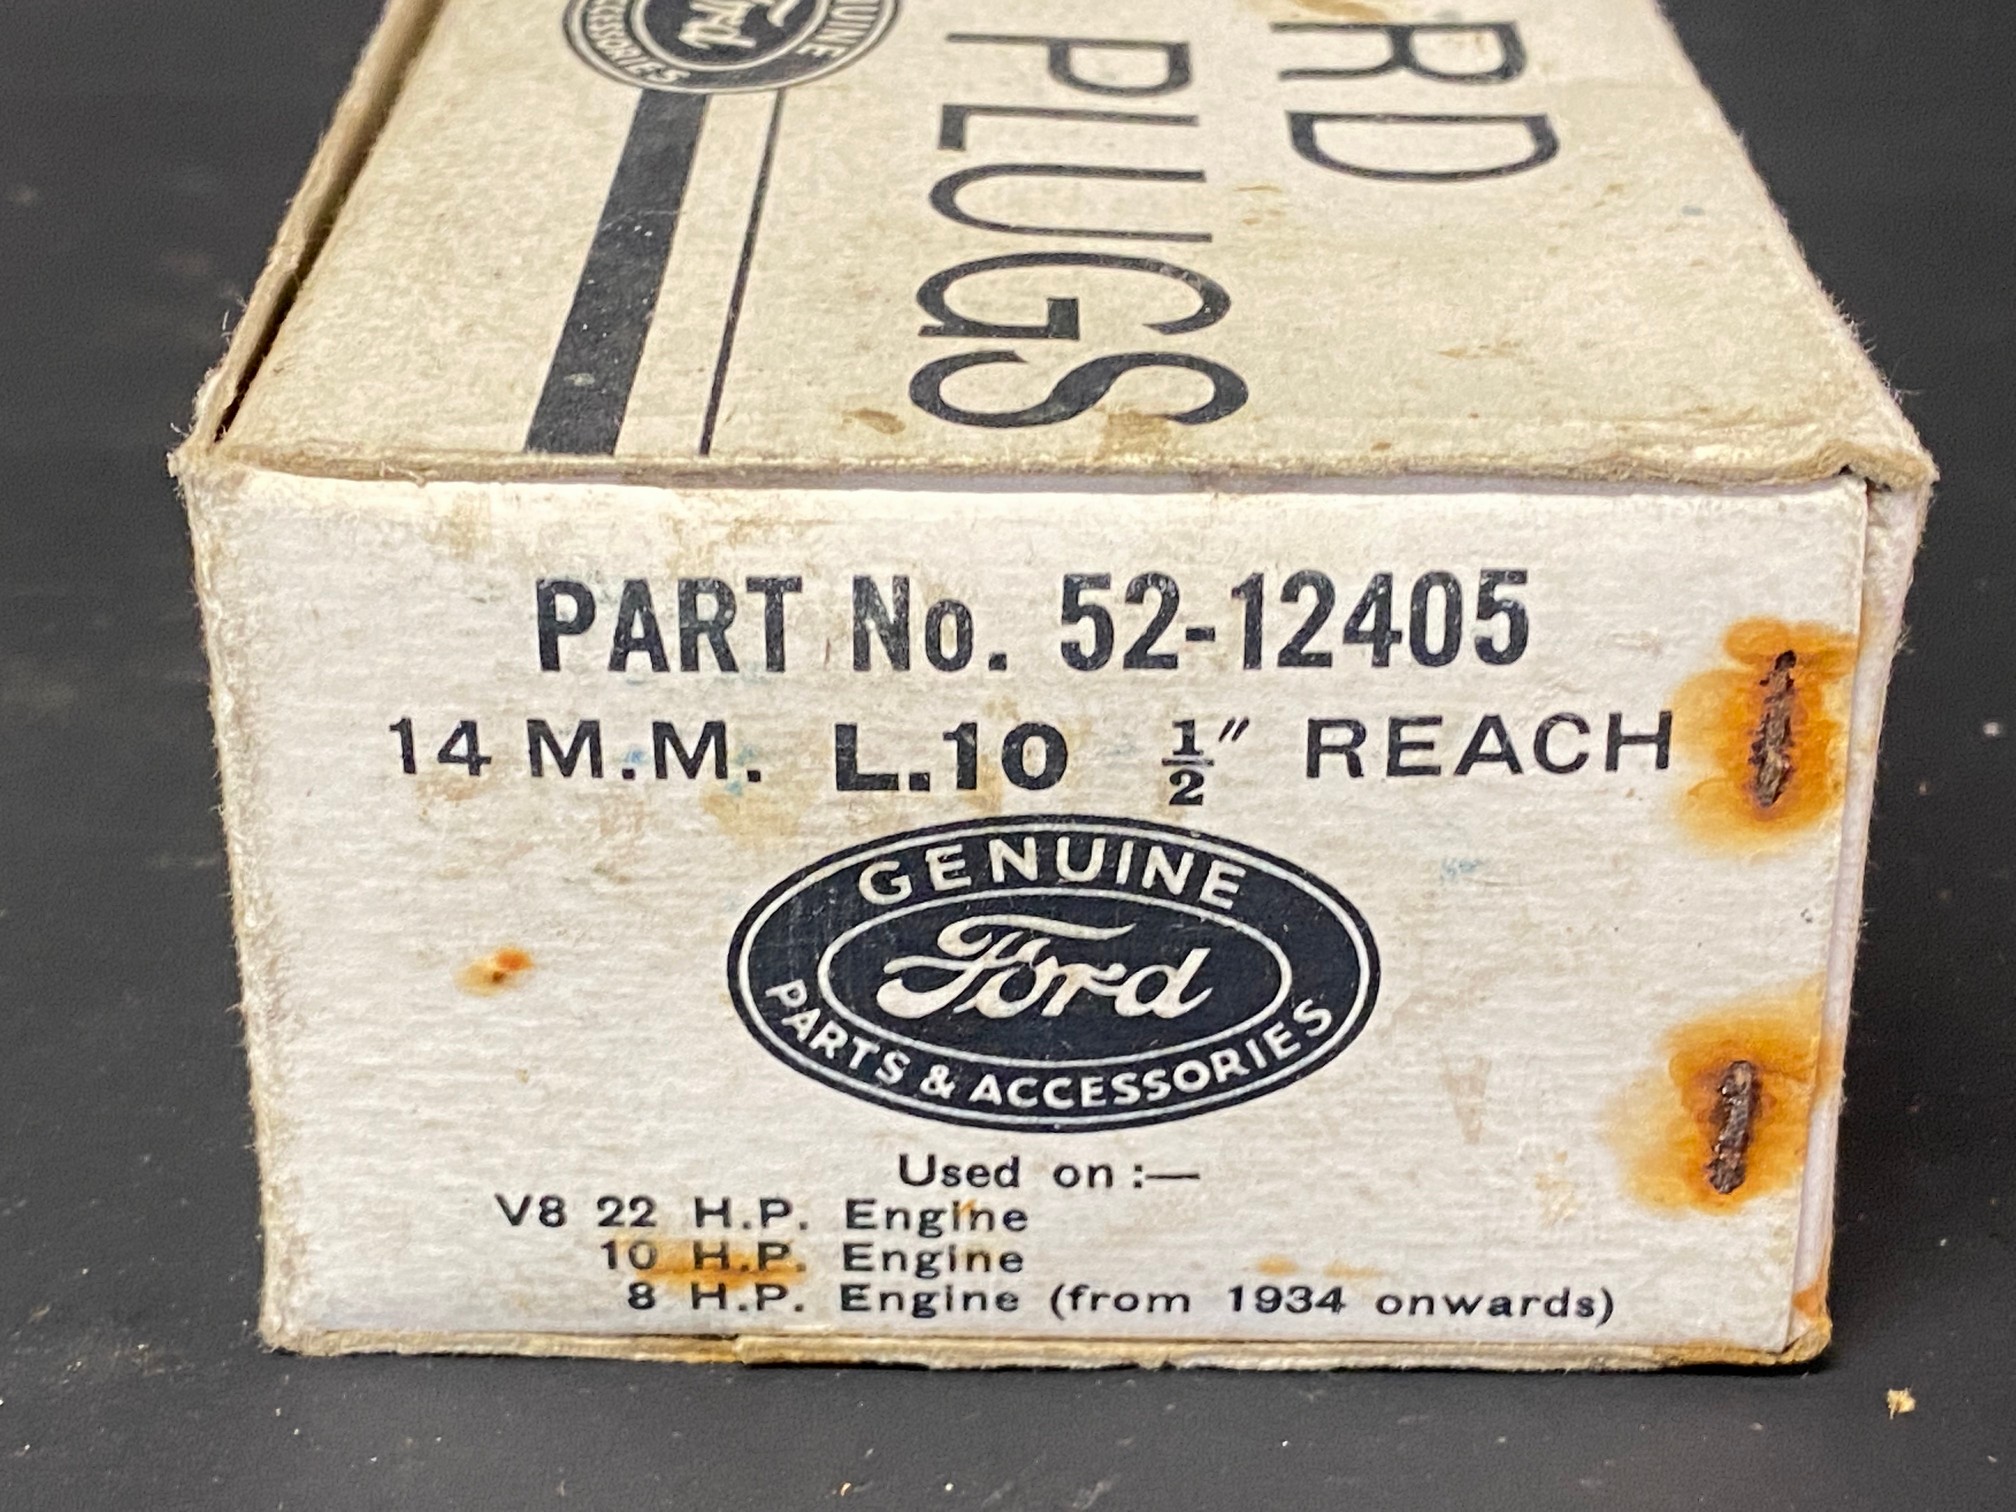 A Ford Spark Plugs cardboard box, manufactured by Champion Sparking Plug Co. Ltd expressly for - Image 2 of 3